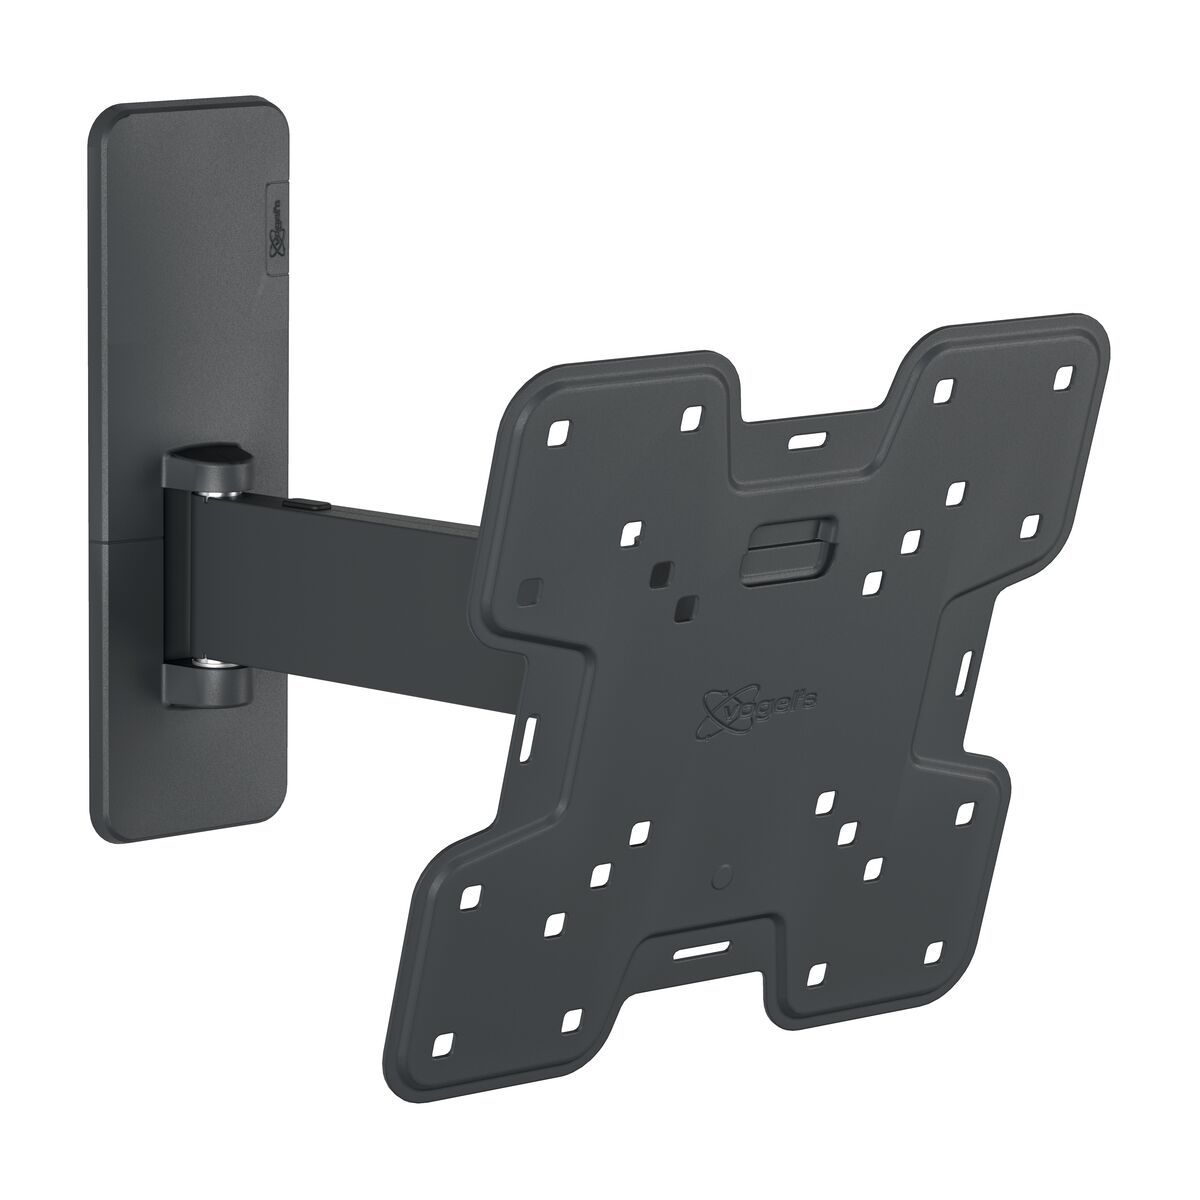 Vogel's TVM 1223 Full-Motion TV Wall Mount - Suitable for 19 up to 43 inch TVs - Motion (up to 120°) swivel - Tilt up to 15° - Product